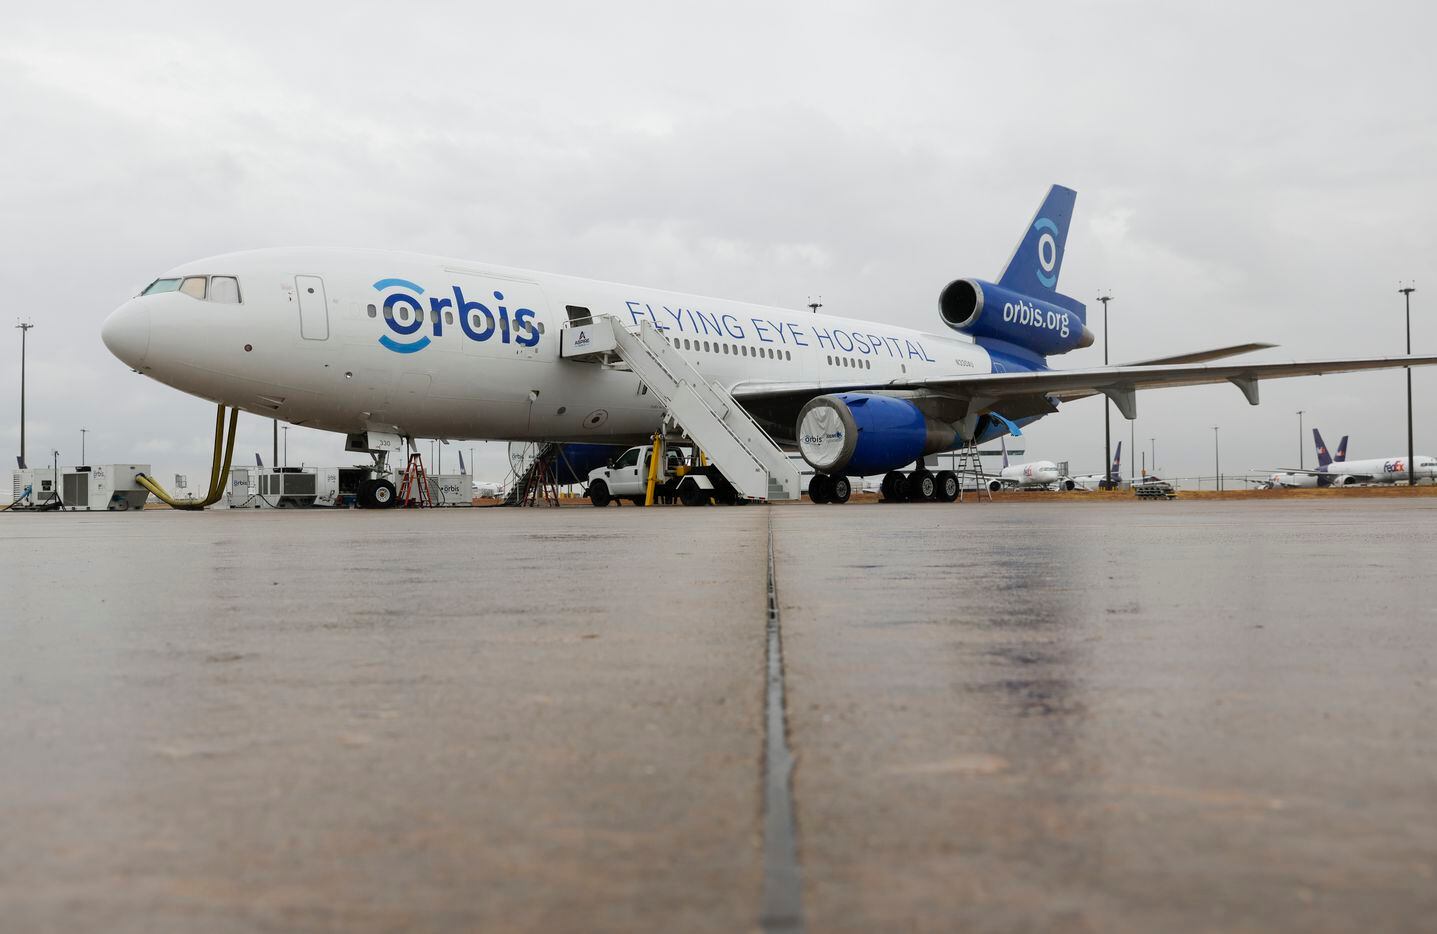 Orbis Flying Eye Hospital located in Fort Worth Alliance Airport on Thursday, Aug. 18, 2022....